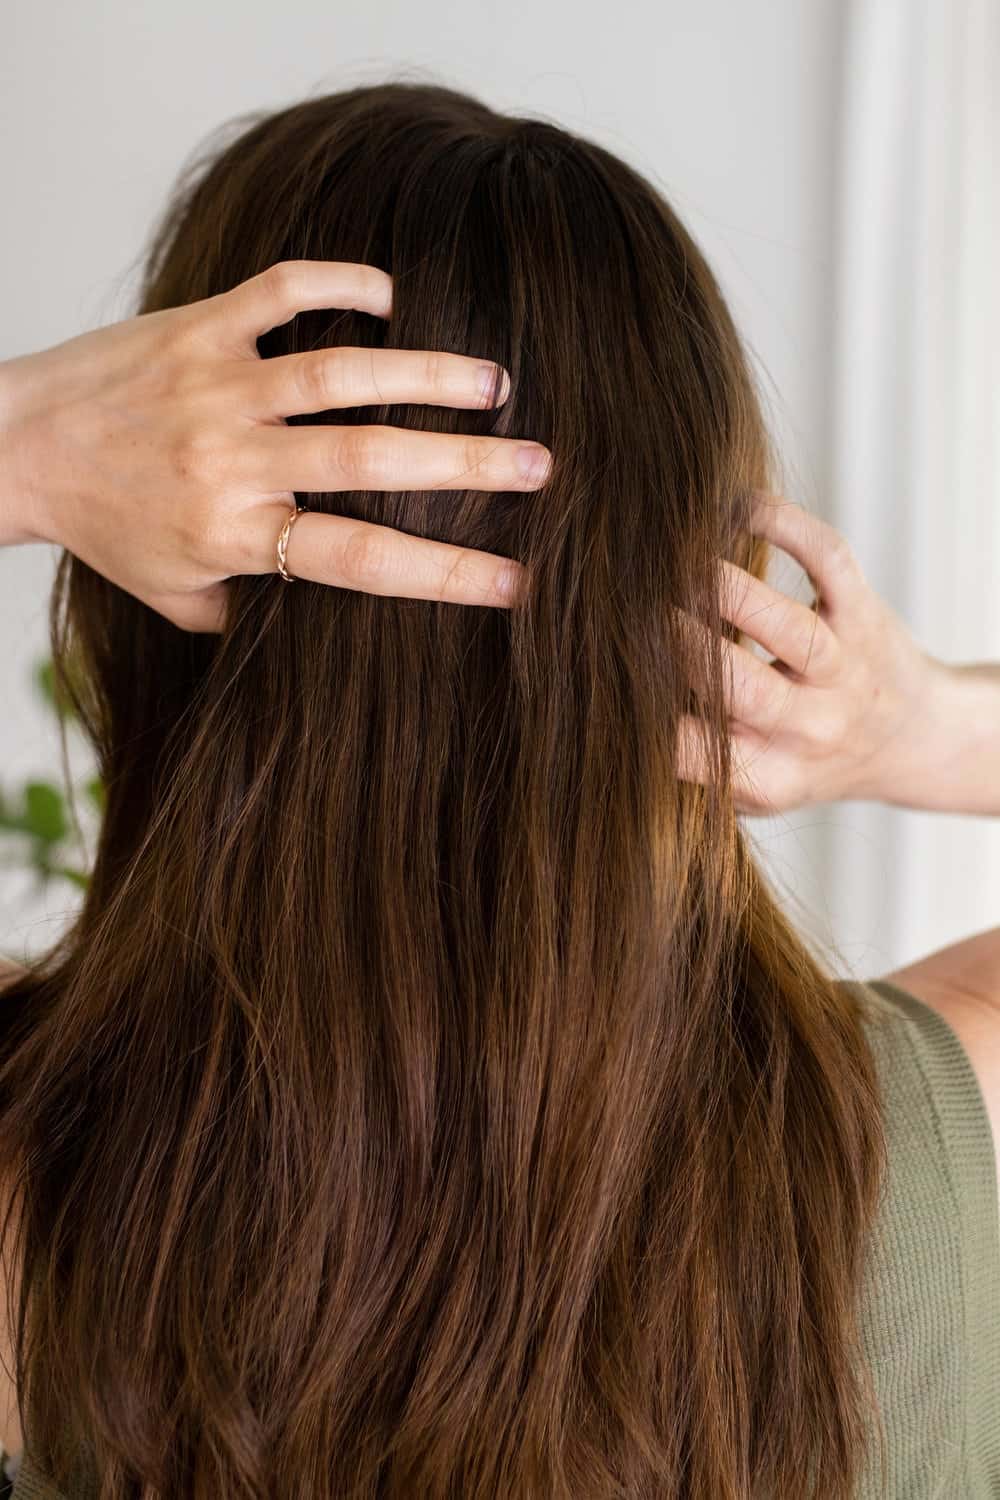 How to scalp massage for hair growth - Work your hands back and down toward the neck